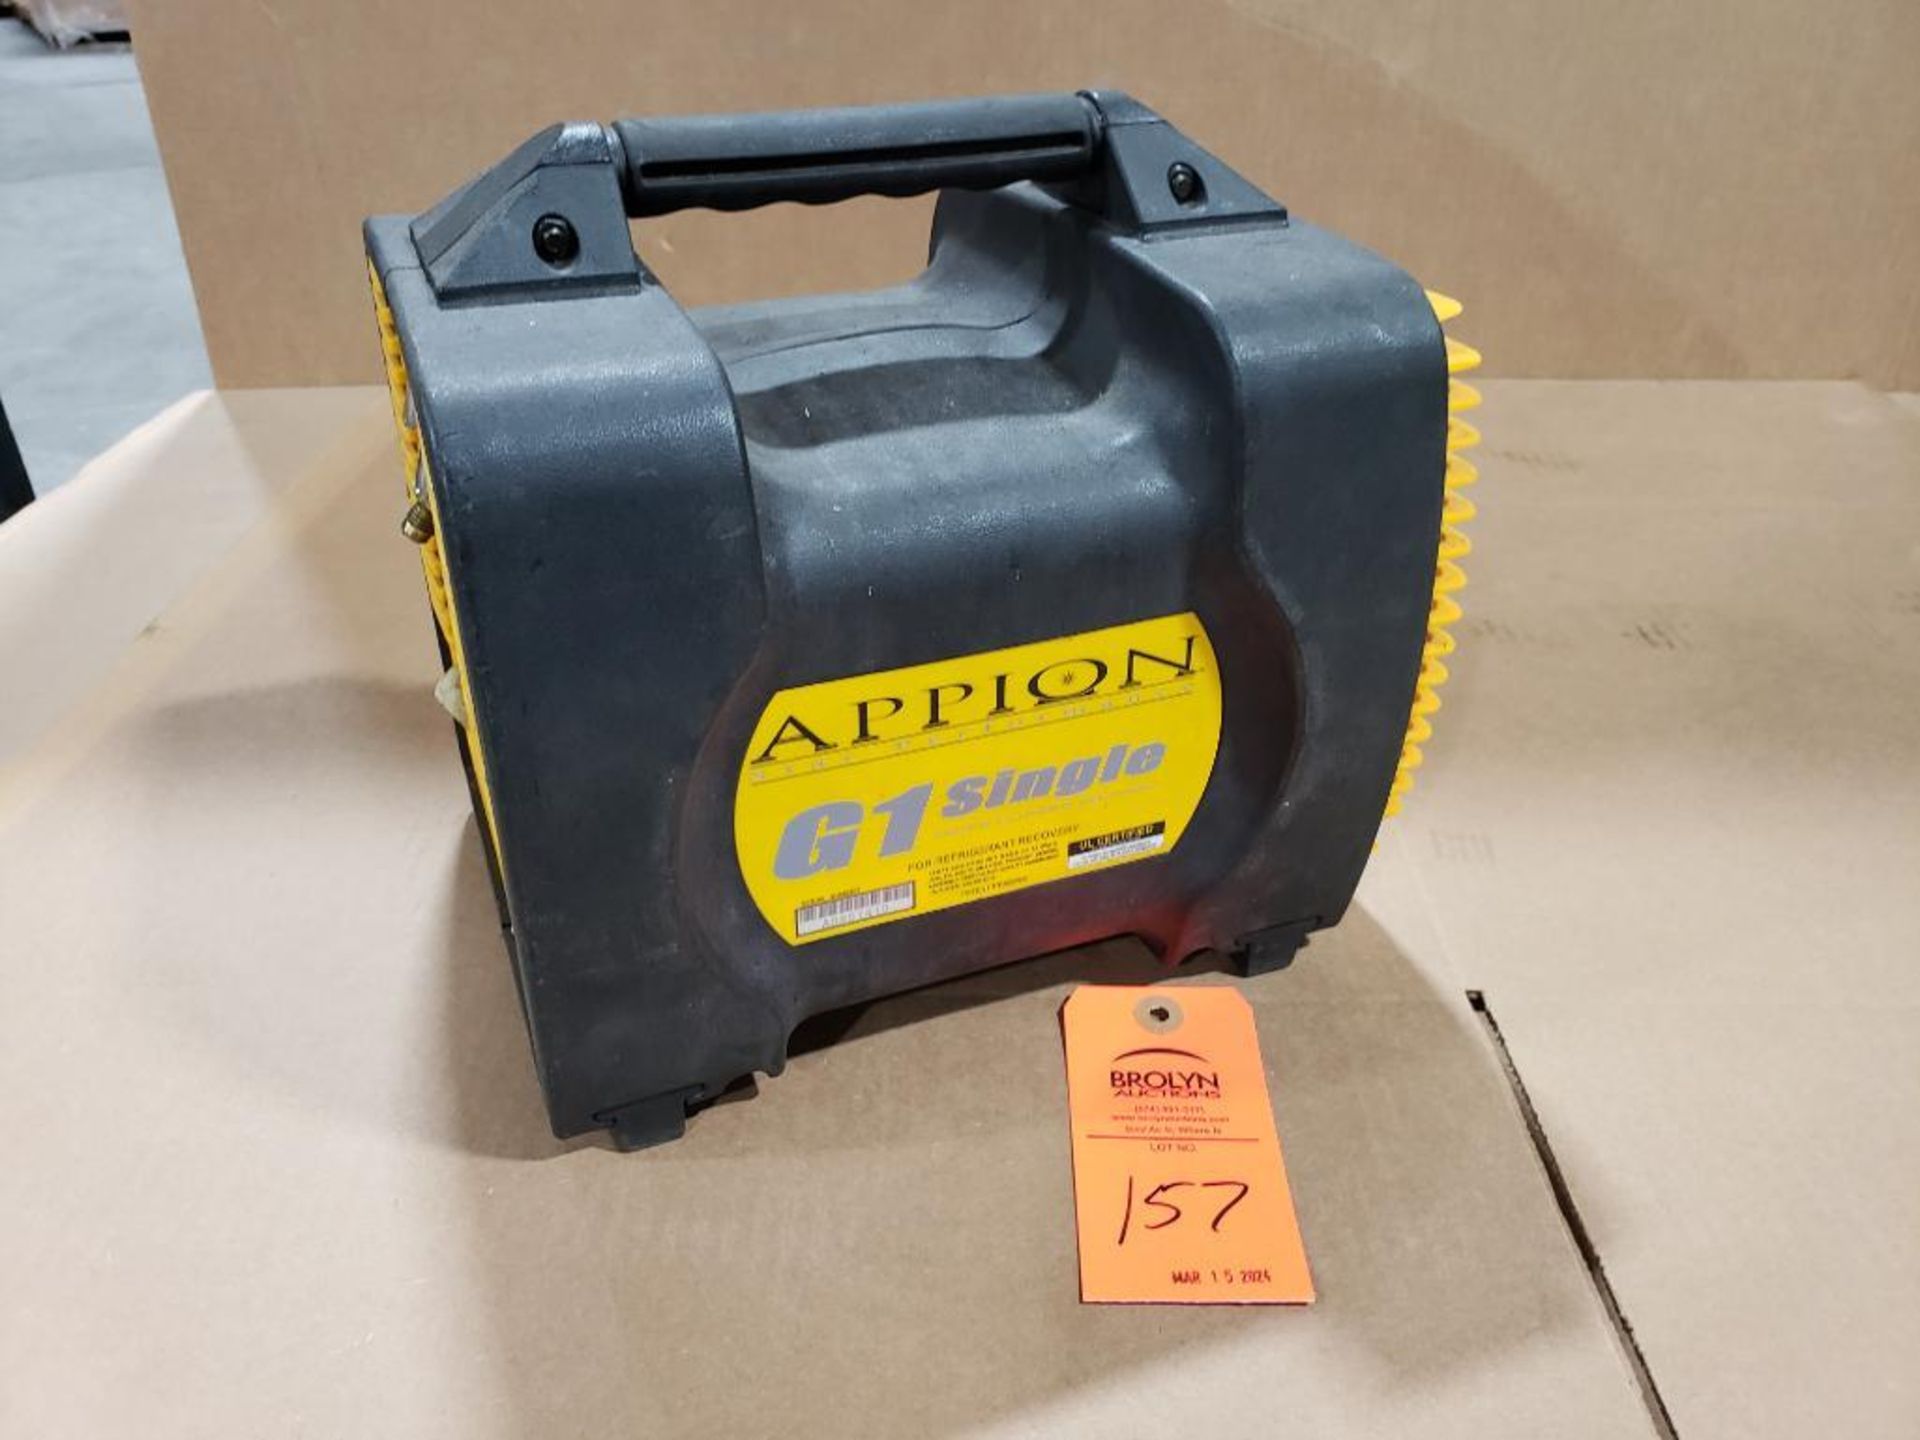 ** Cord cut. Parts repairable** Appion G1 Single refrigerator recovery machine. .